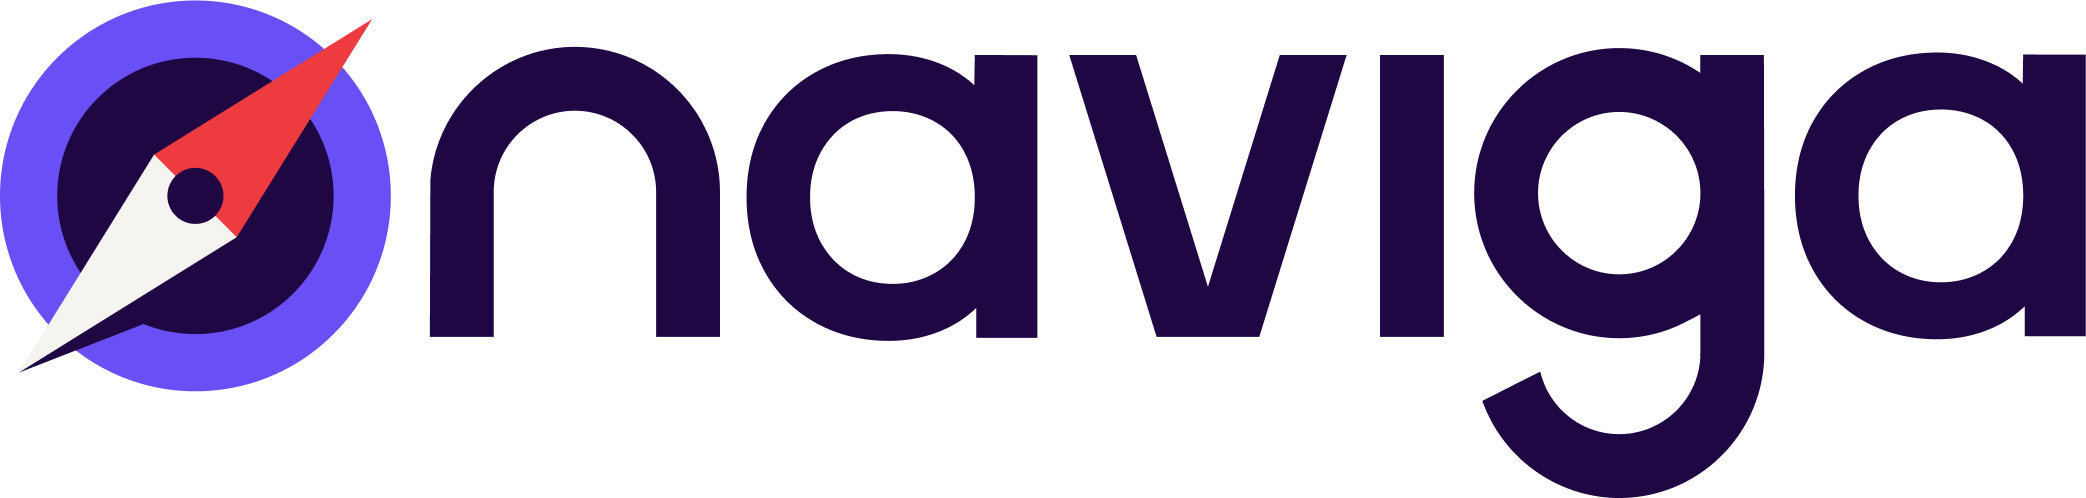 Endpoint Consulting Client - Naviga